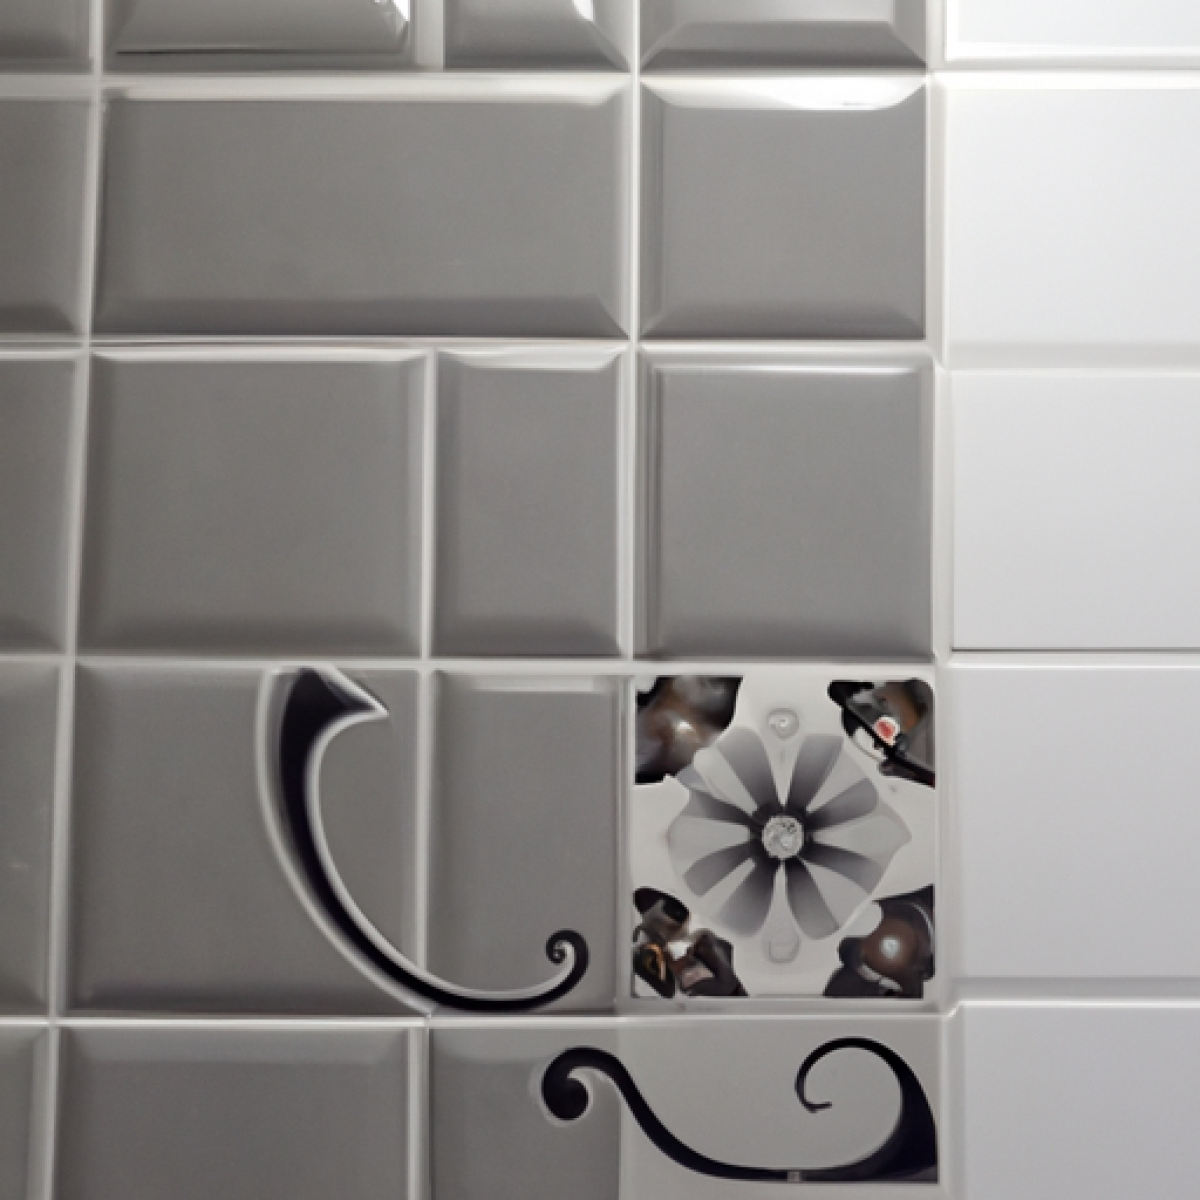 A detail image related to the topic: Pintar Azulejos Cocina Gris